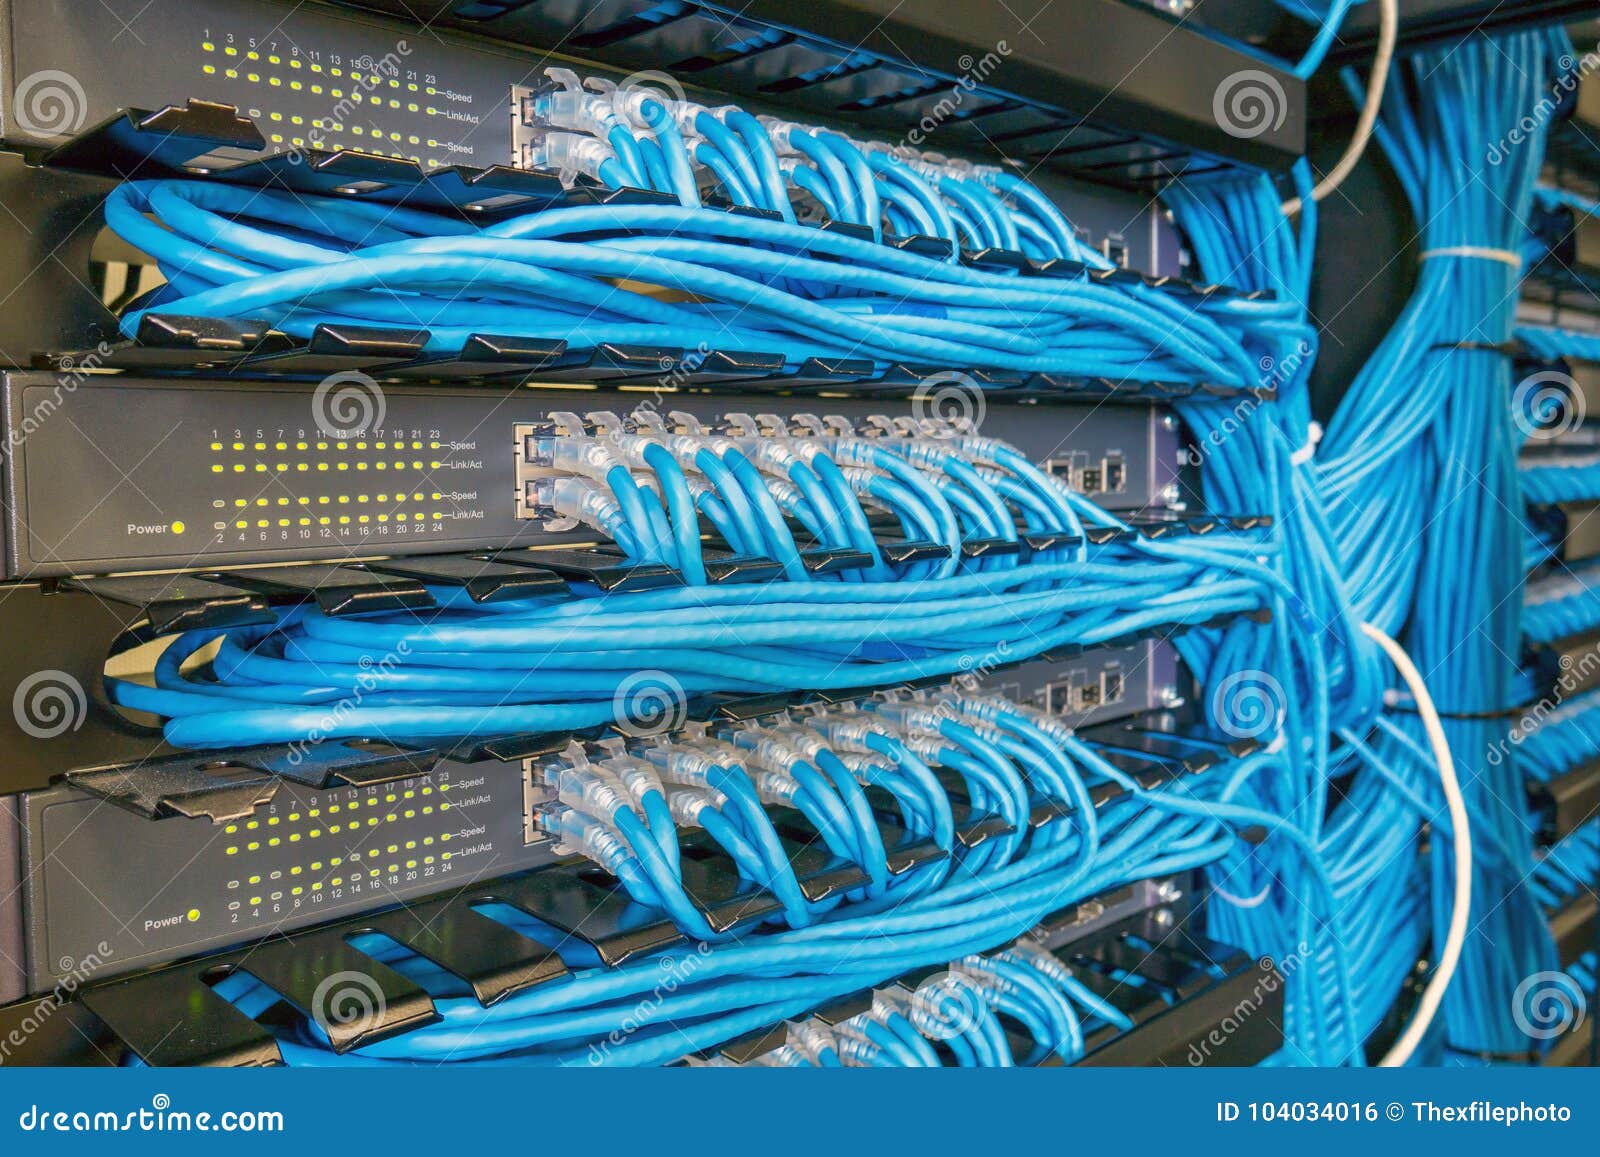 Network Switch And Ethernet Cables Stock Photo Image Of